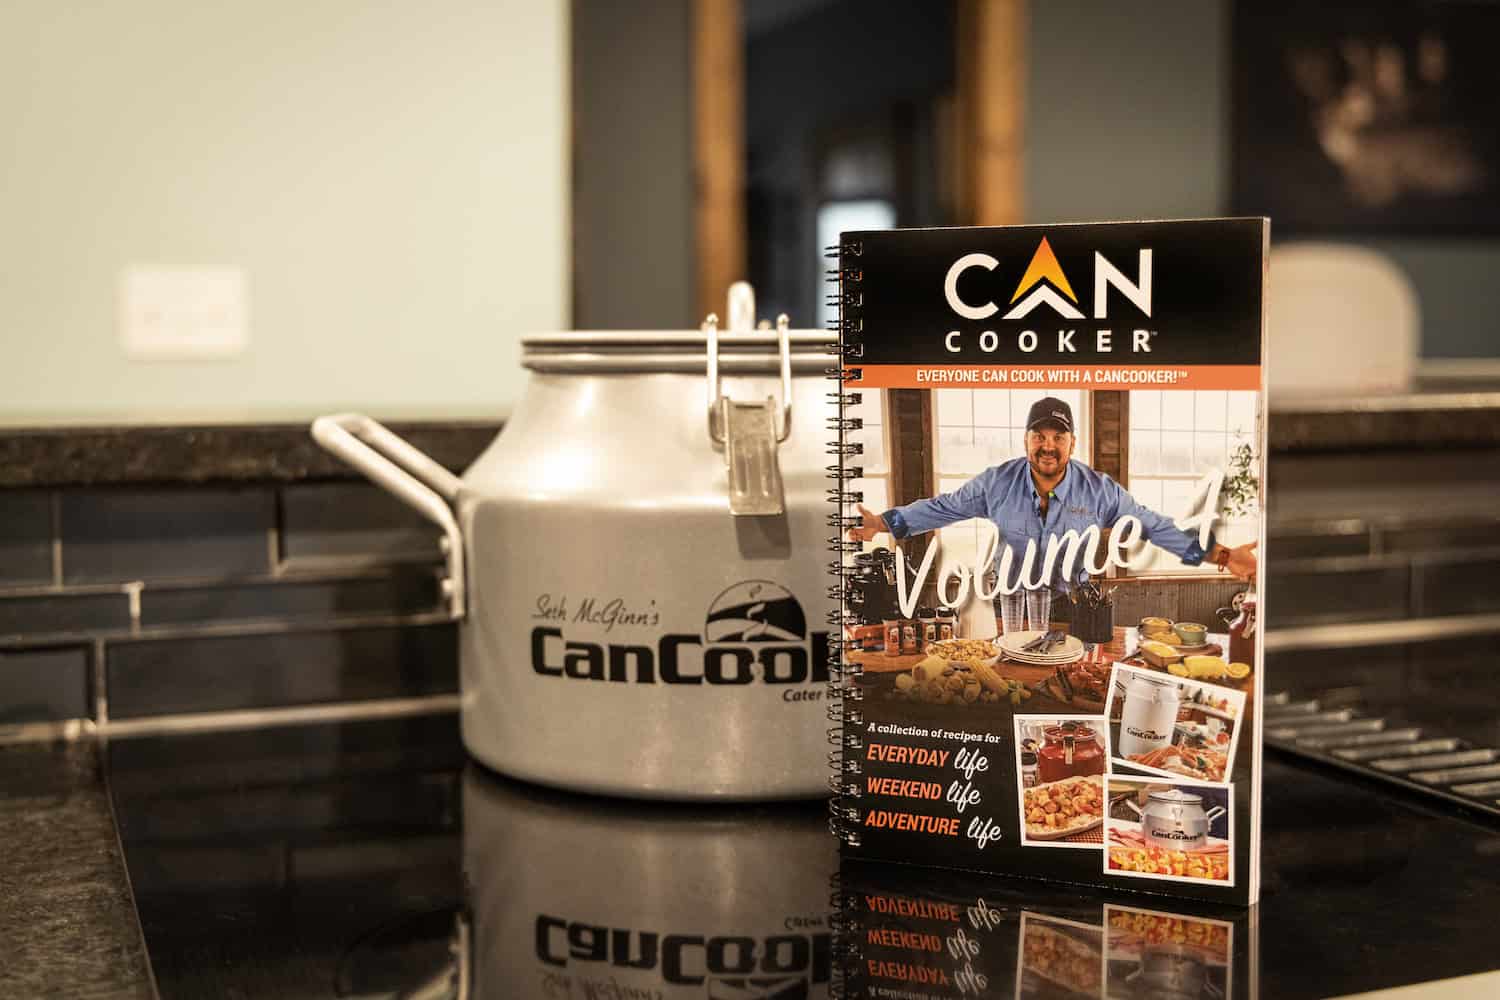 Cooking with CanCooker - Seth McGinn's CanCooker